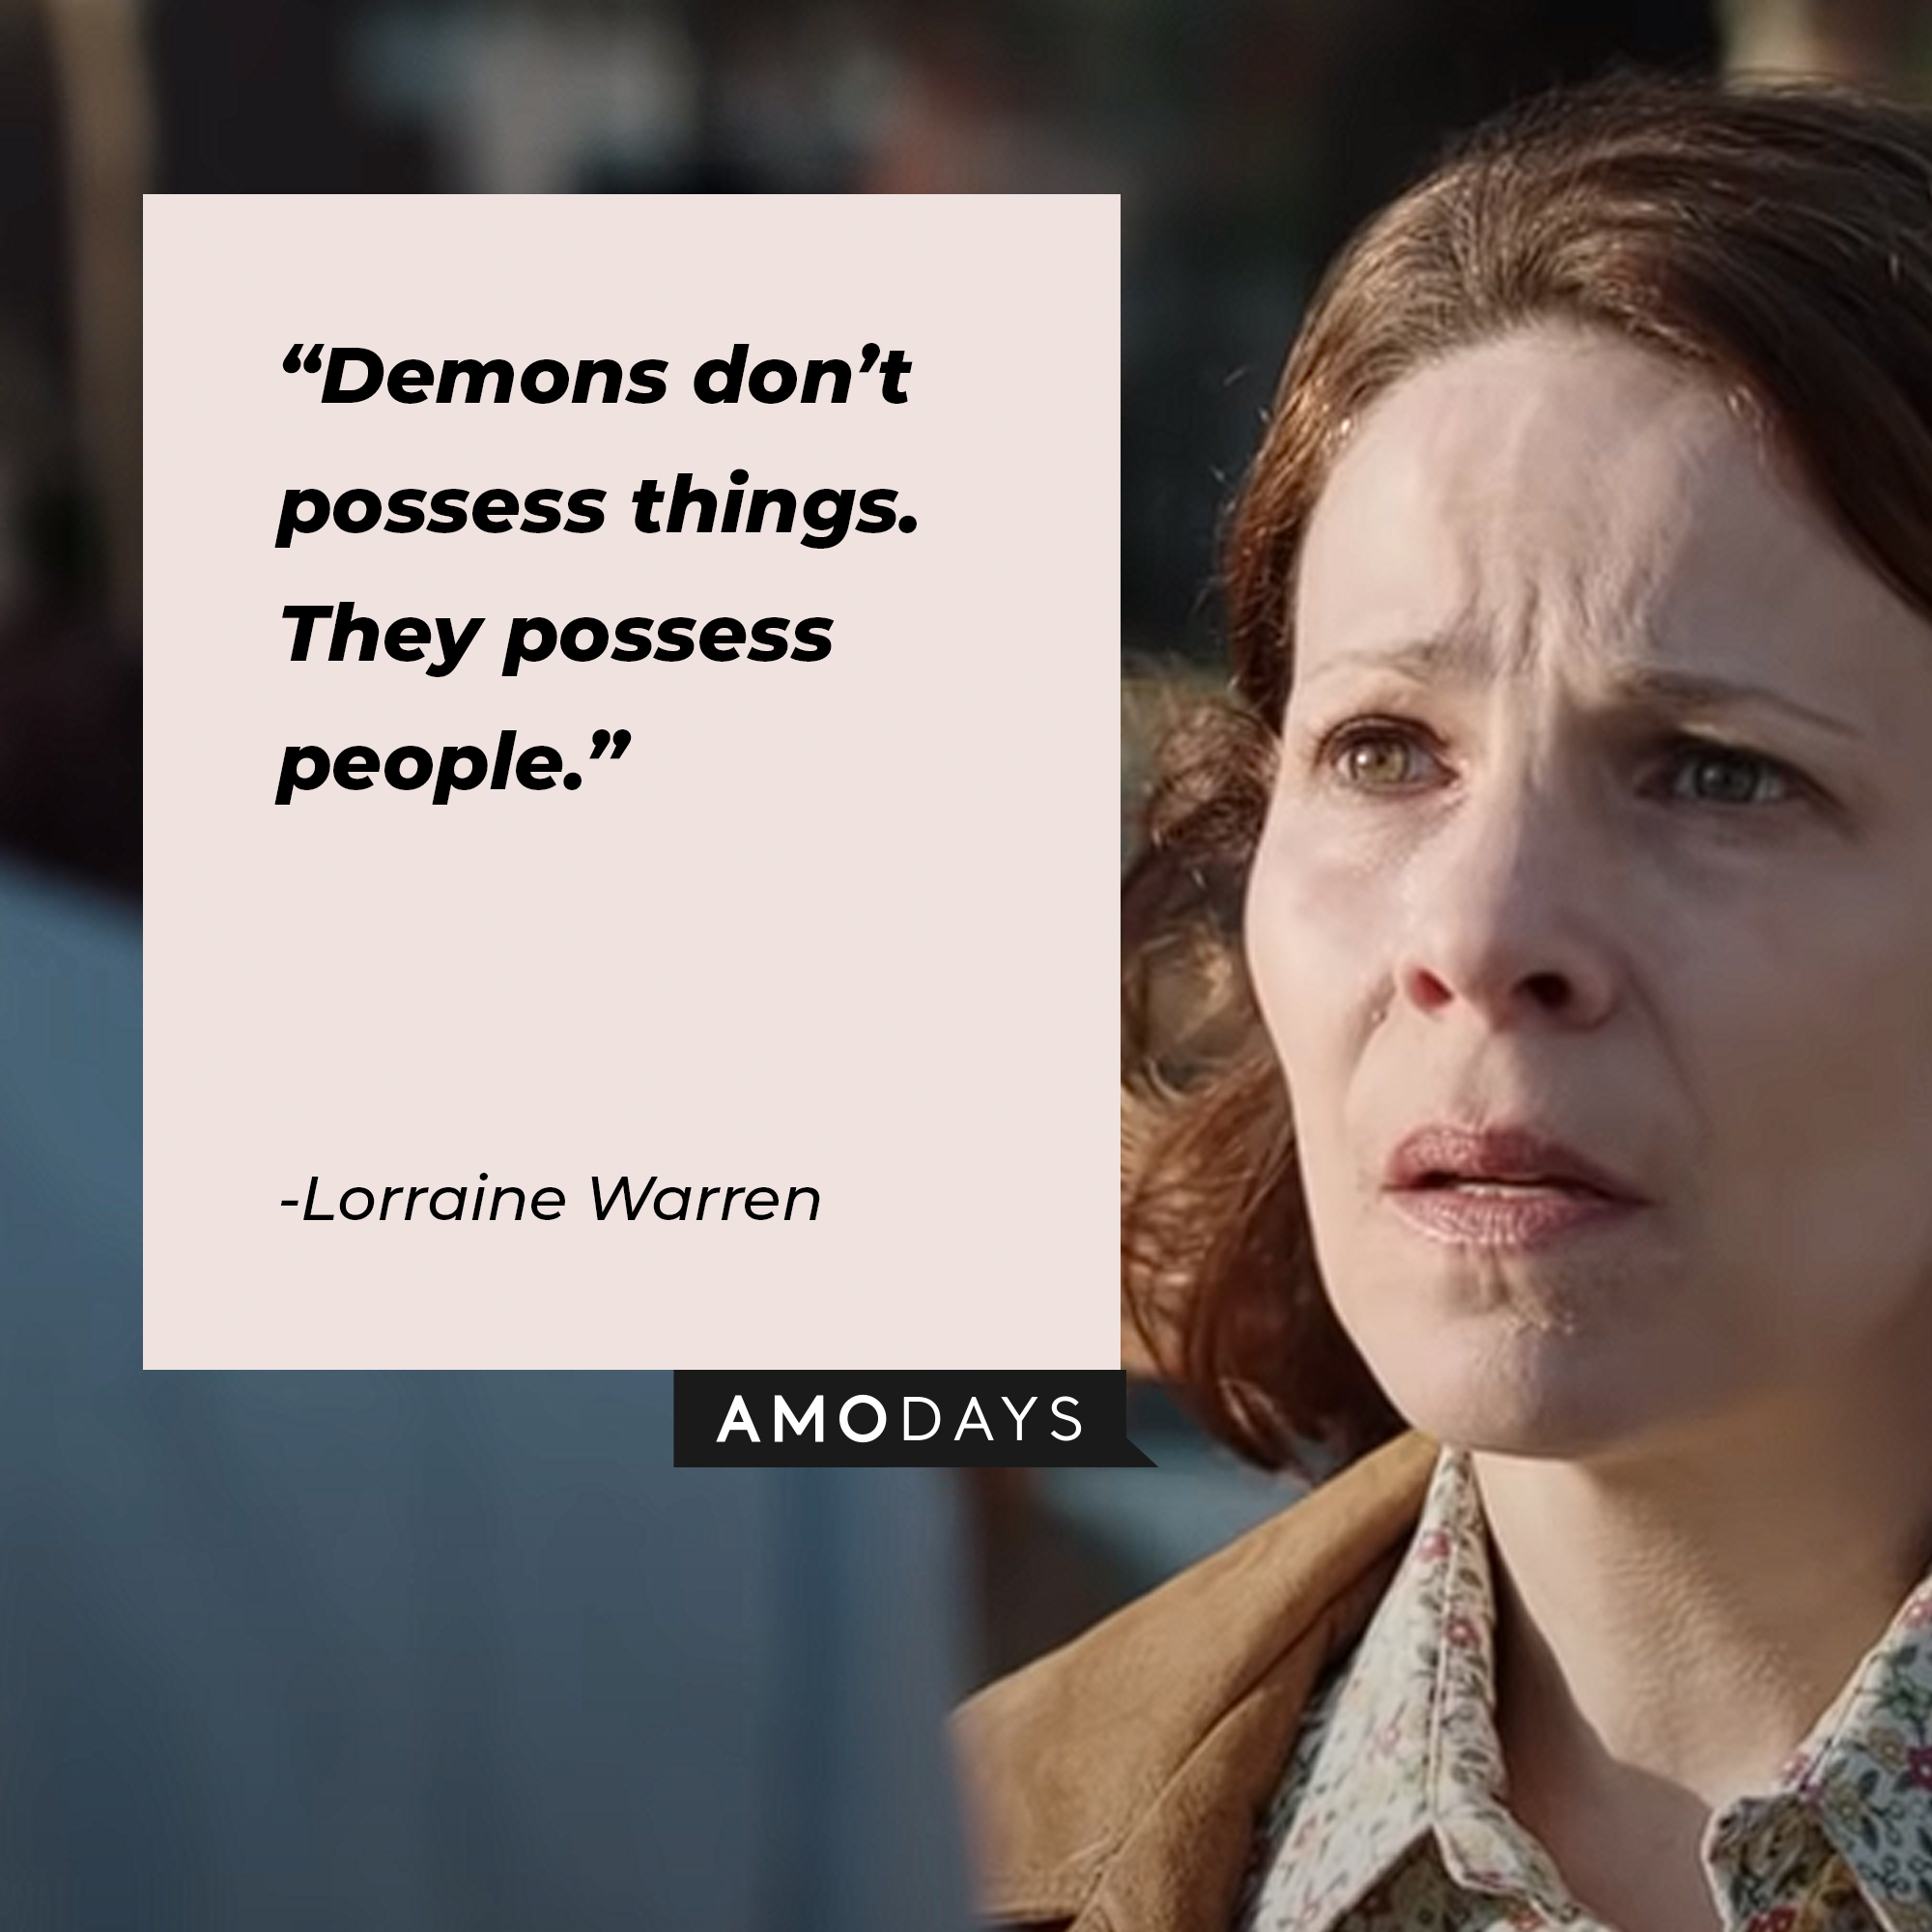 In image of a character from the Conjuring with Lorraine Warrens's quote: “Demons don’t possess things. They possess people.” | Source: youtube.com/WarnerBrosPictures